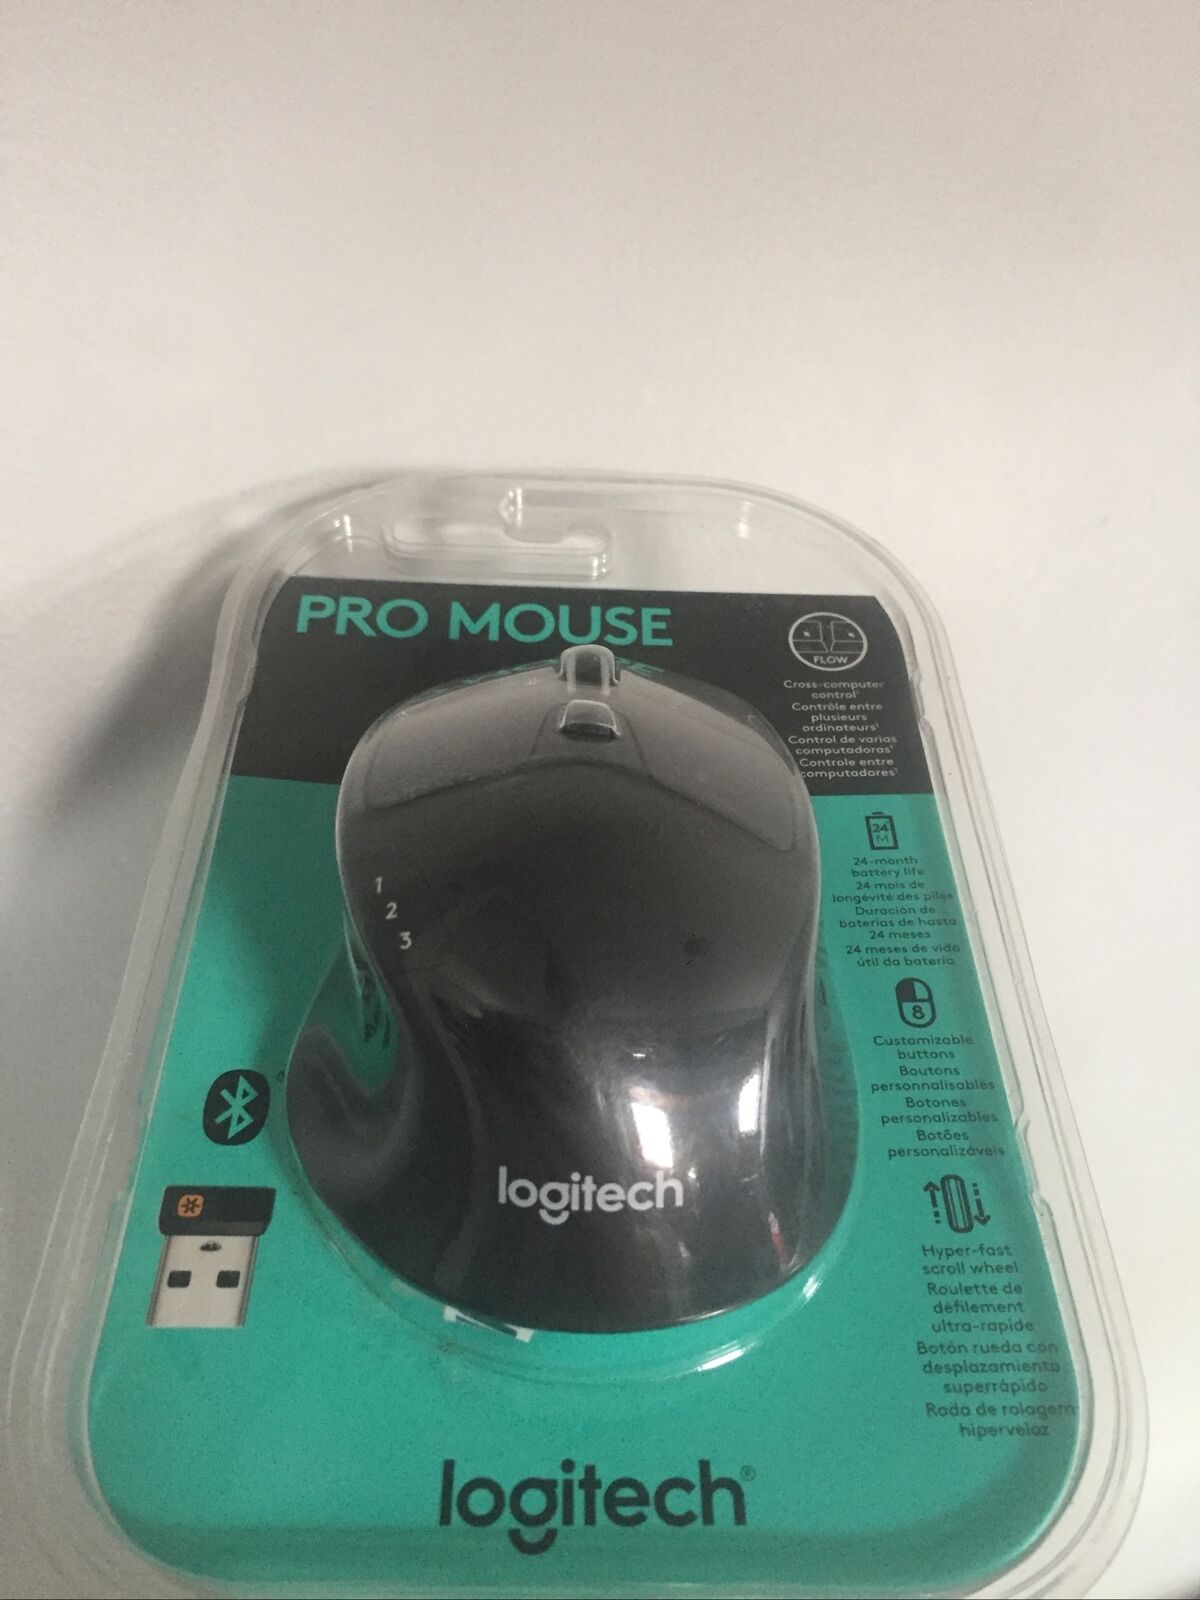 Logitech Pro Mouse M720 Wireless - New Unopened Package